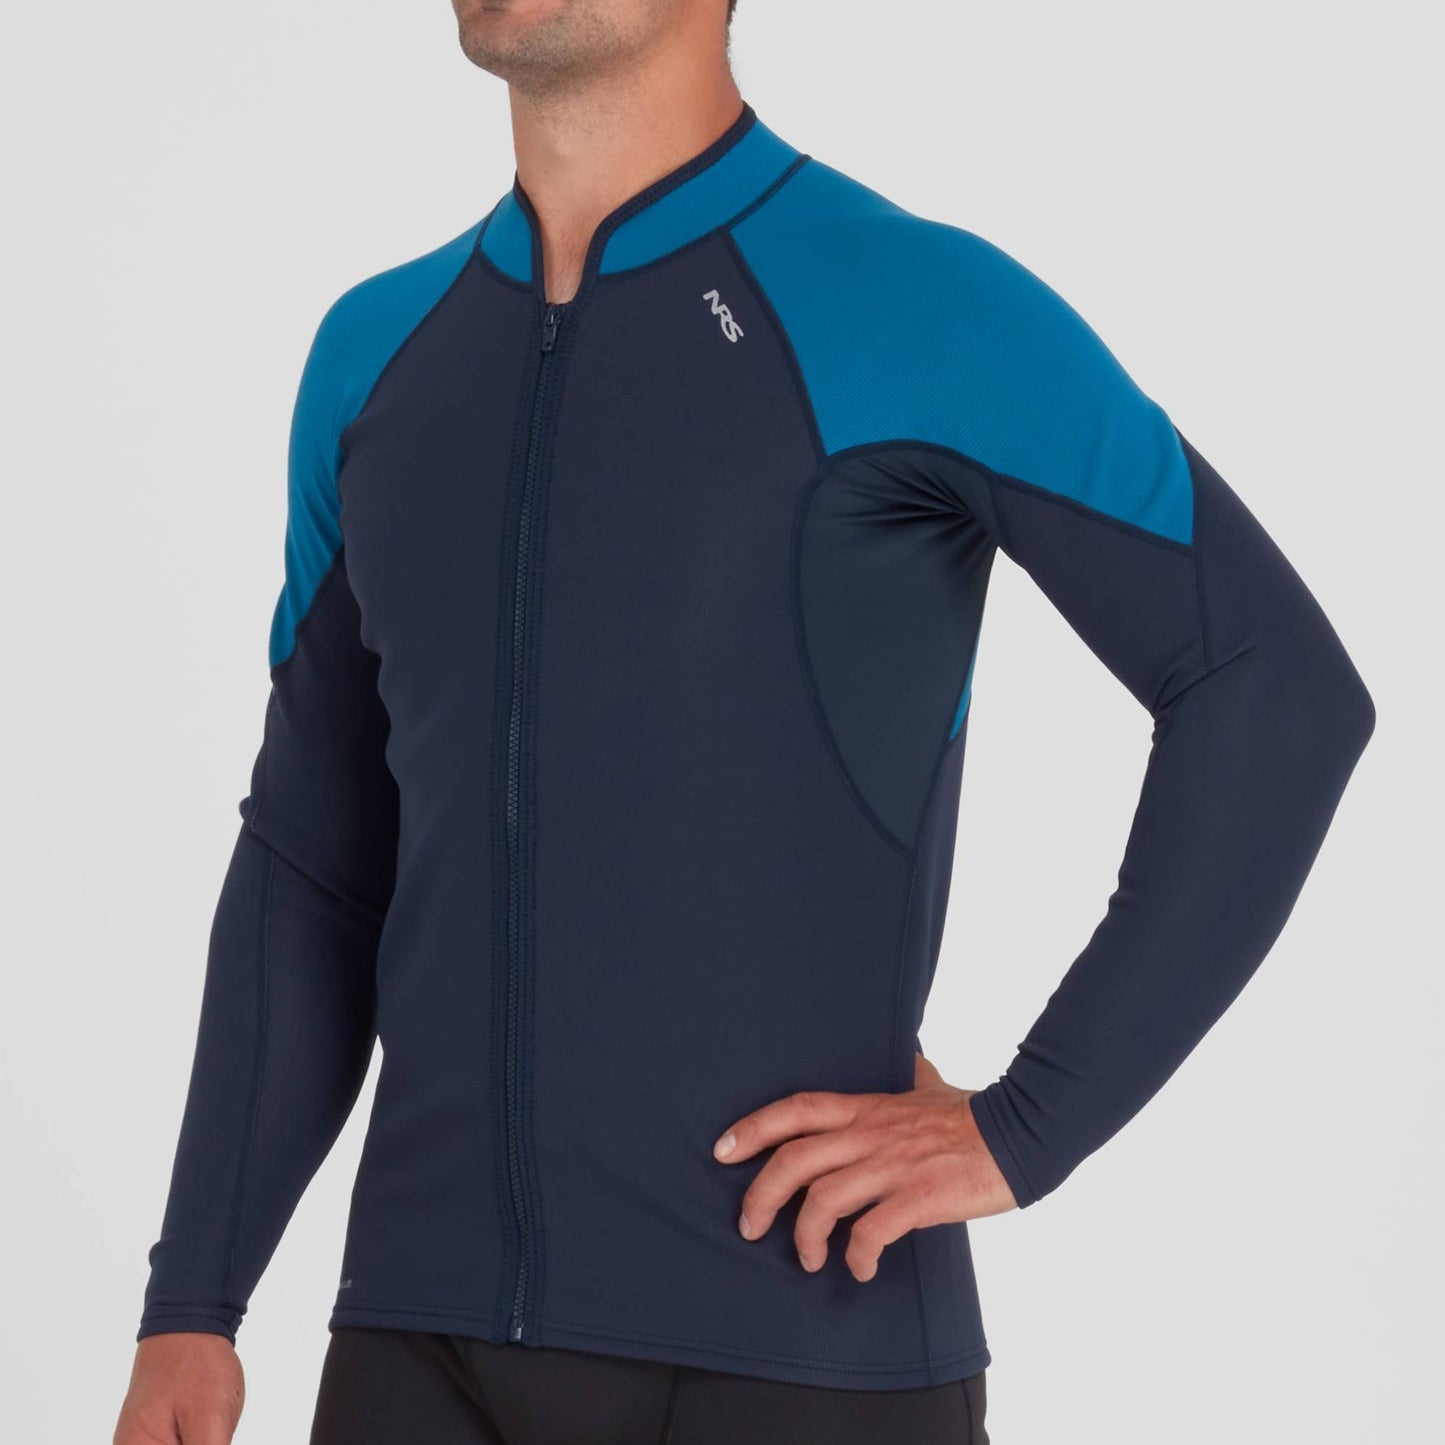 Man wearing a blue long-sleeve NRS Hydroskin 0.5 Jacket designed for paddling performance, with a front zipper.